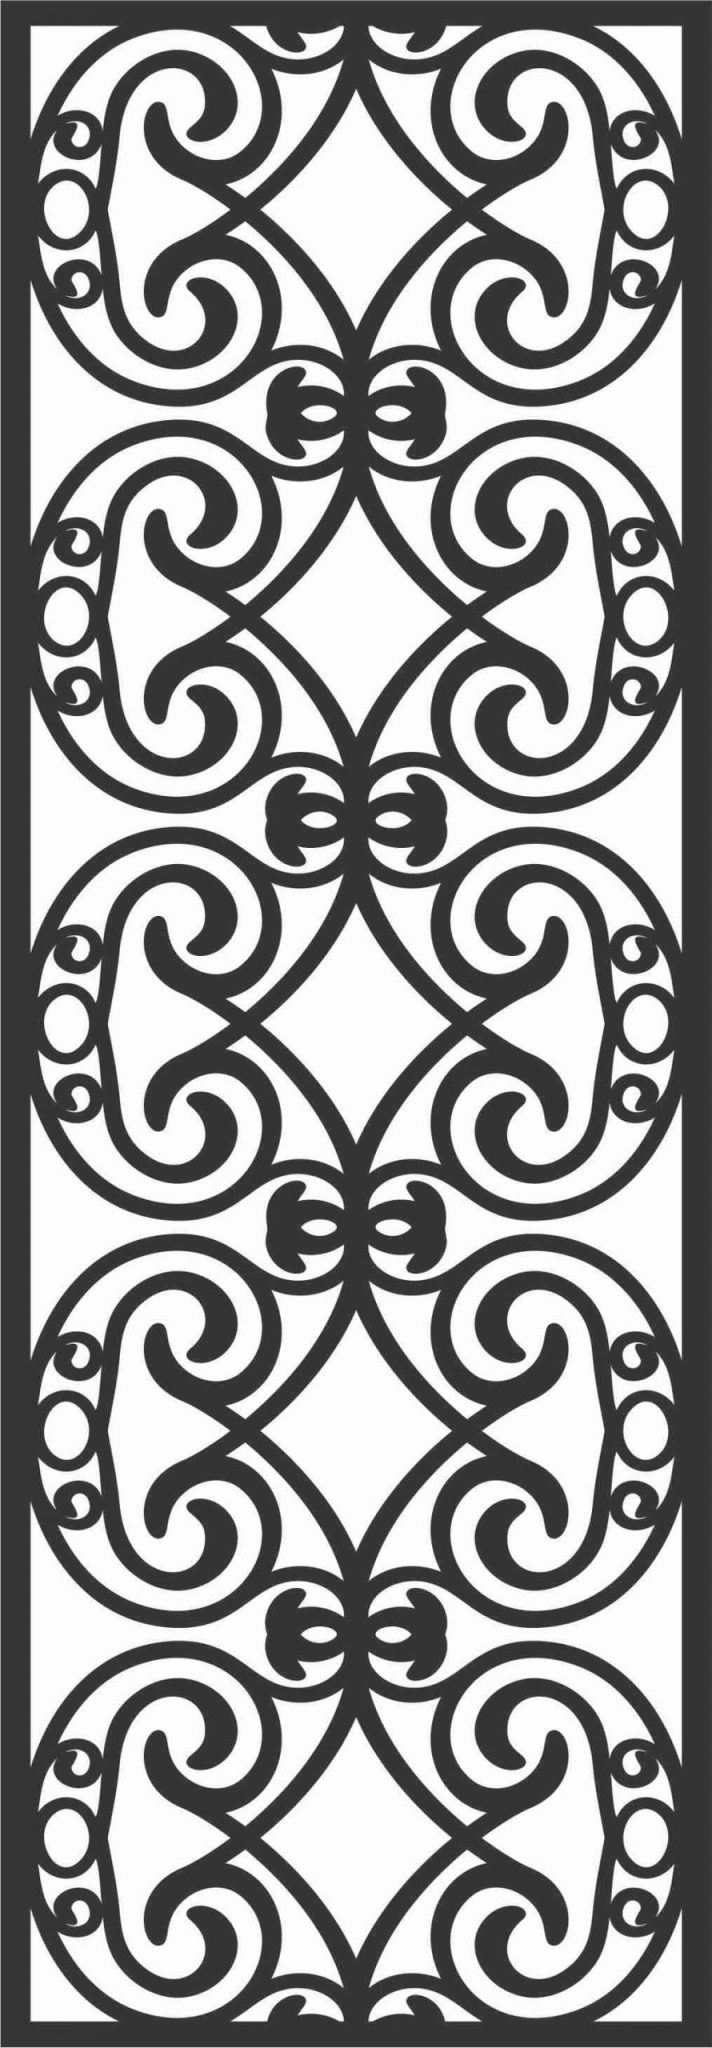 Imperial House Front veranda Grill Panel Design DXF File